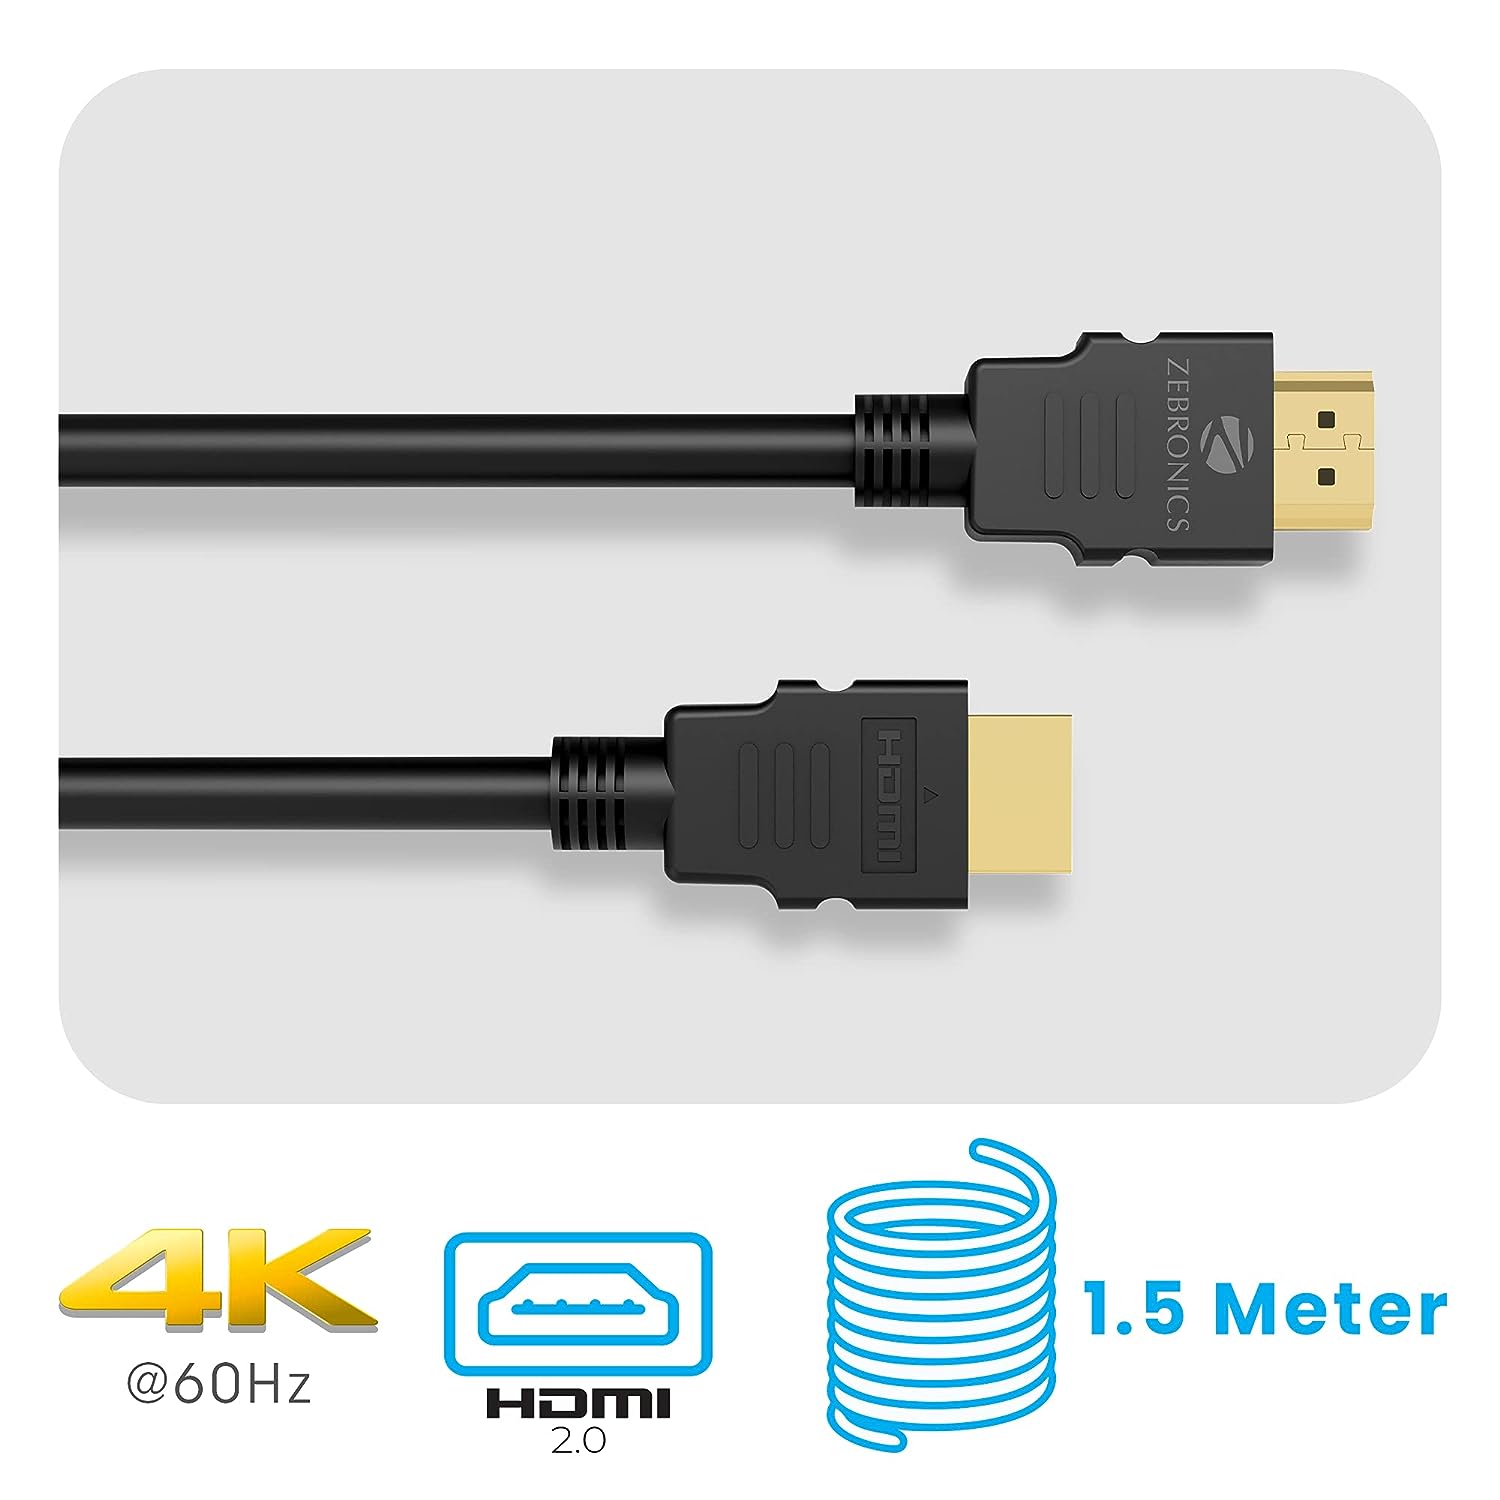 Zebronics Zeb-HAA1520 (1.5 Meter) HDMI Cable Supports 3D, 4K, ARC & CEC Extension, Compatible with HDMI-Enabled TV, Blu-ray, Playstation (Gold Plated Connectors)